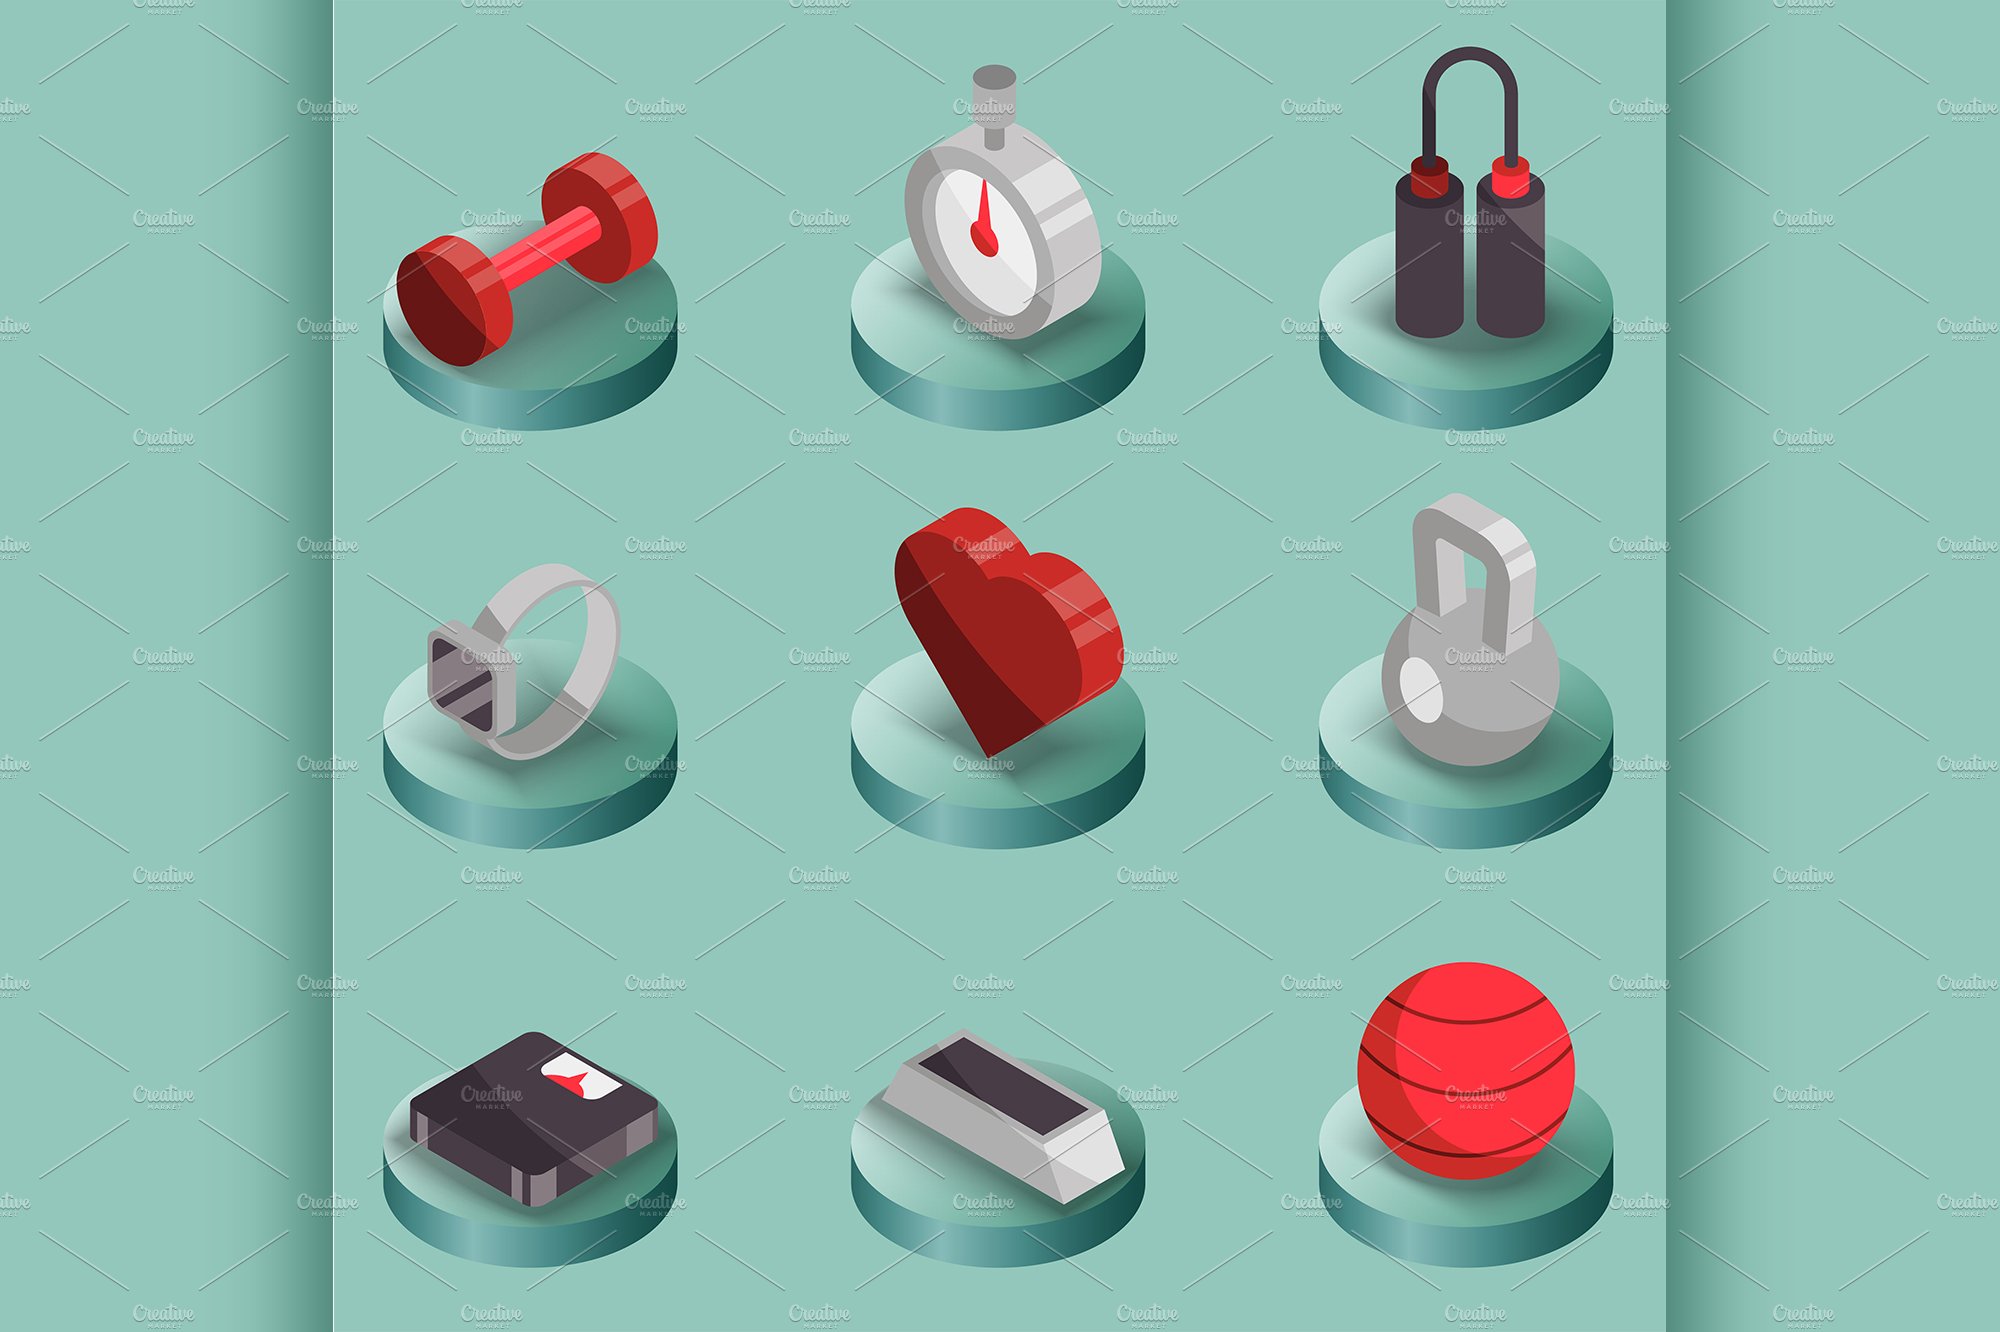 Fitness color isometric icons cover image.